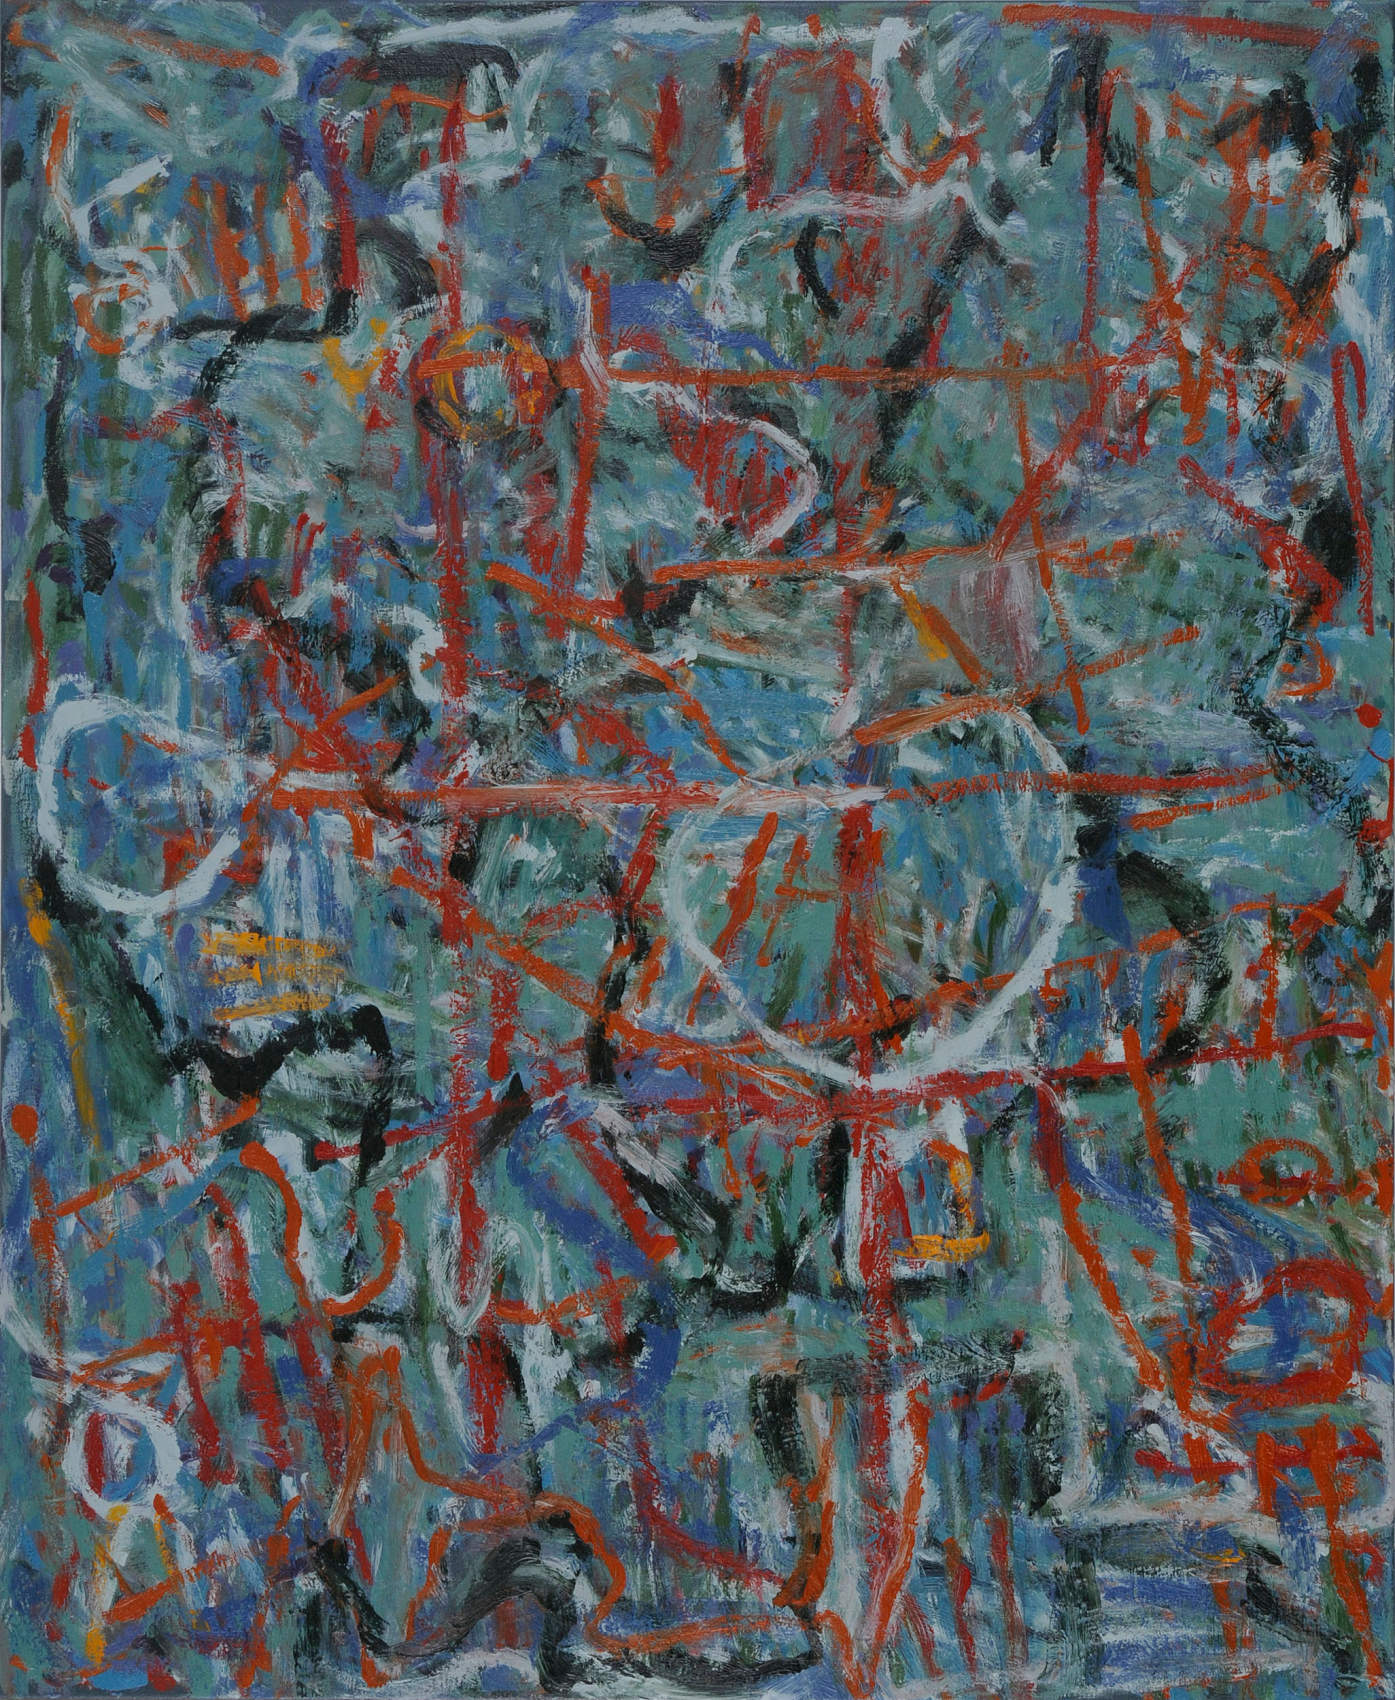 Compass, oil on canvas, 44 x 36 inches, 2008